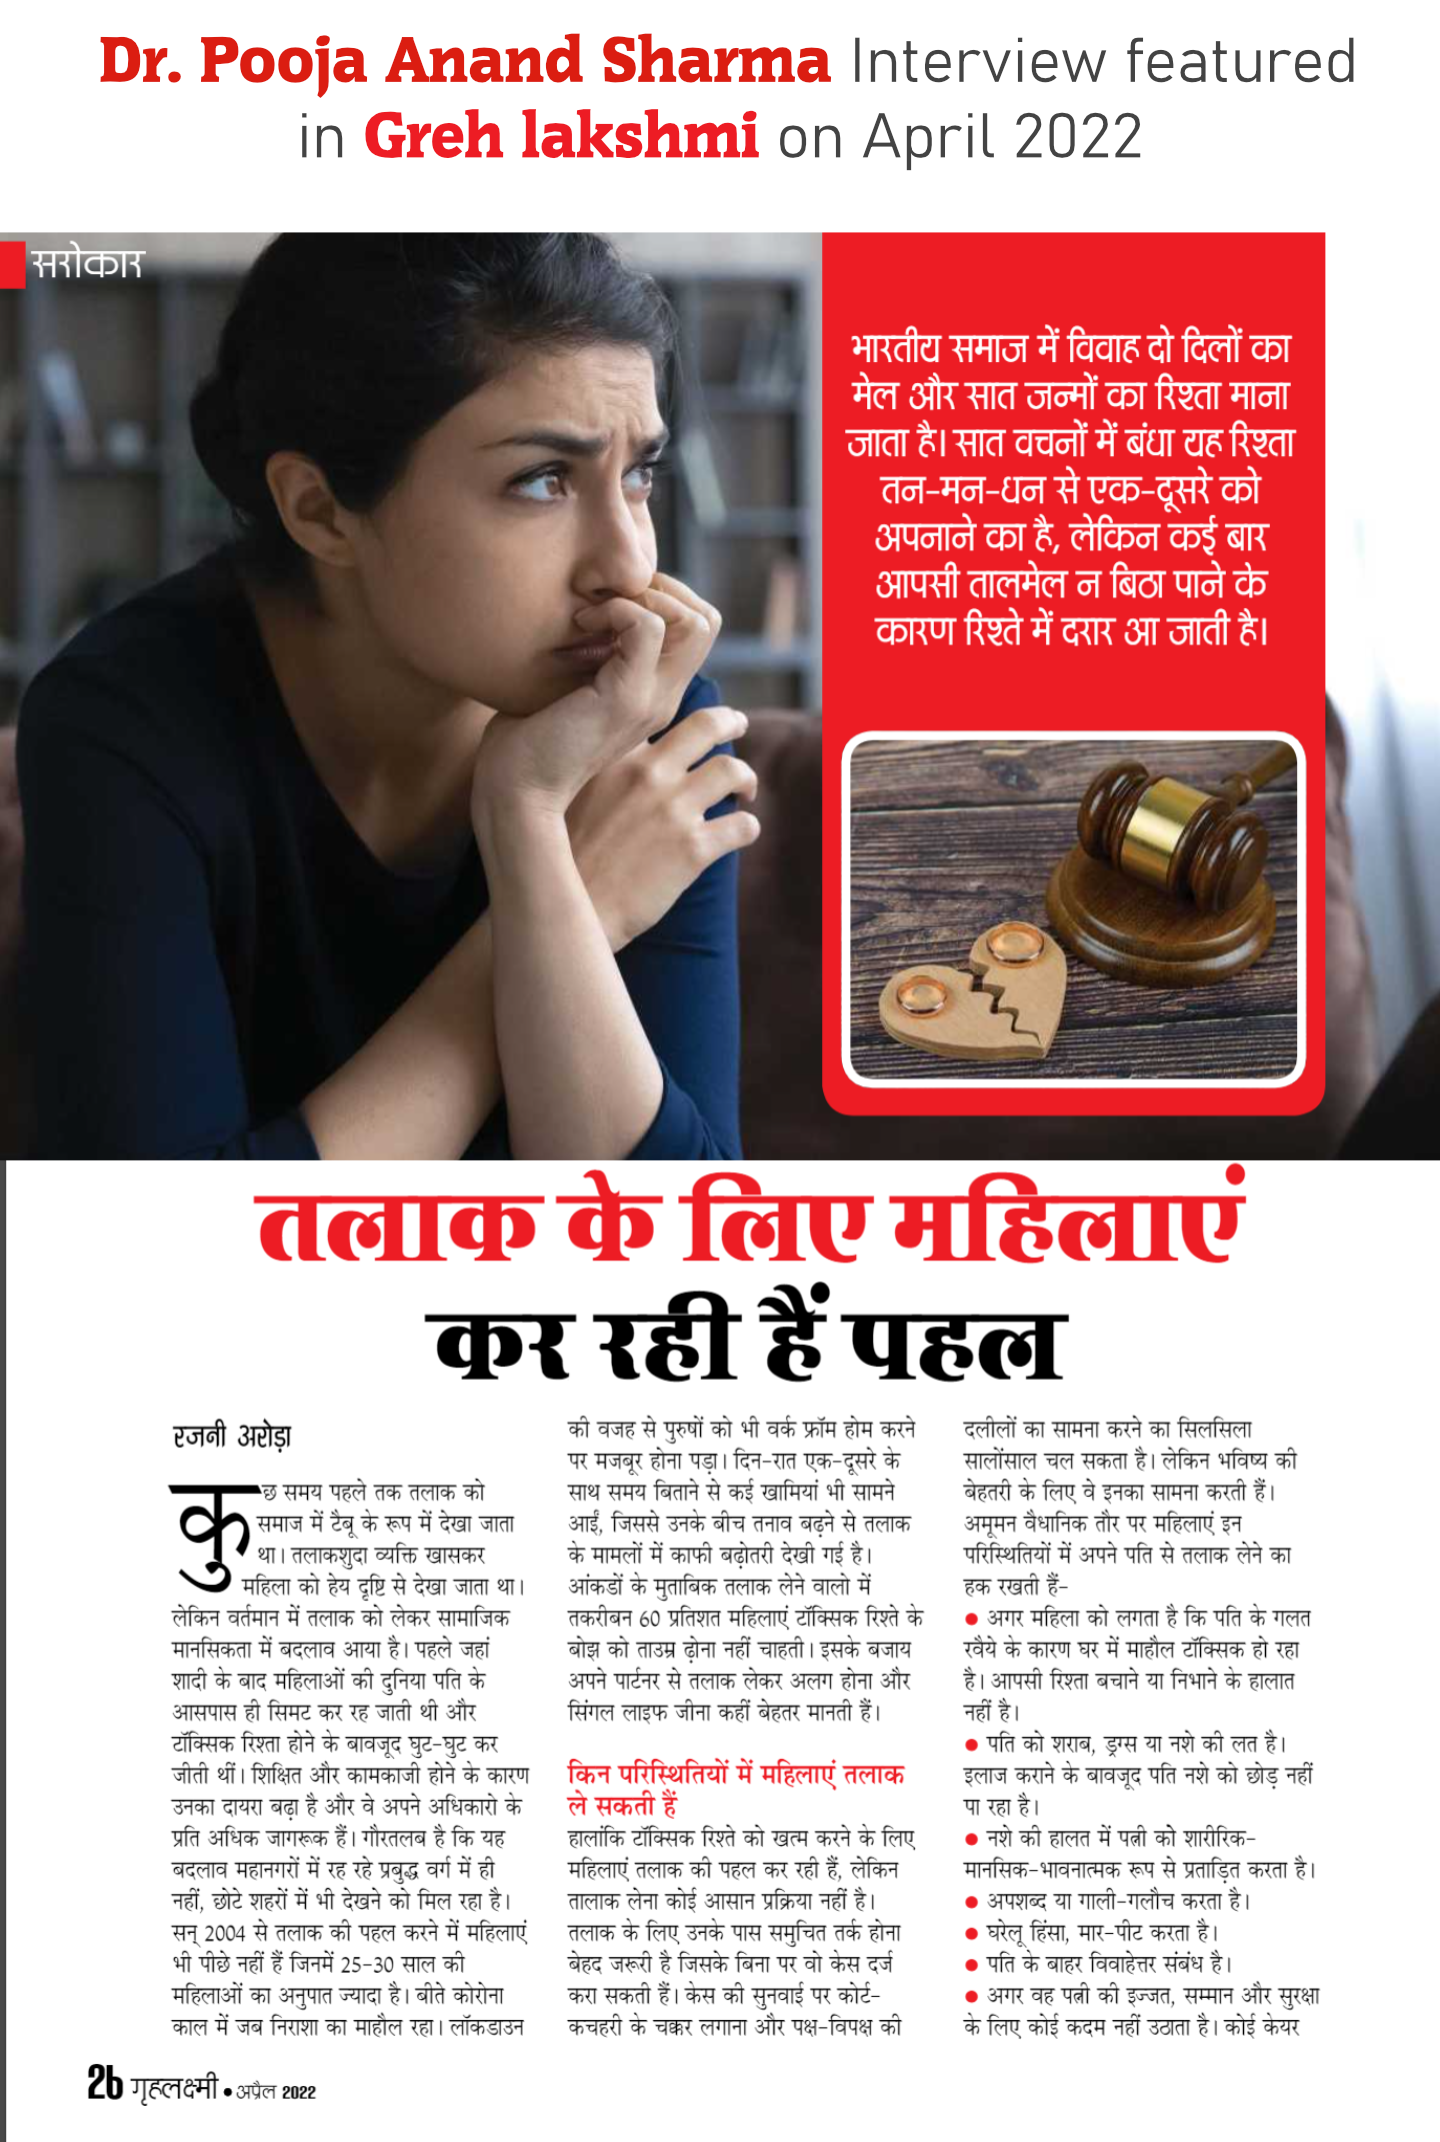 Interview of Dr. Pooja Anand Sharma featured in GrehLaxmi